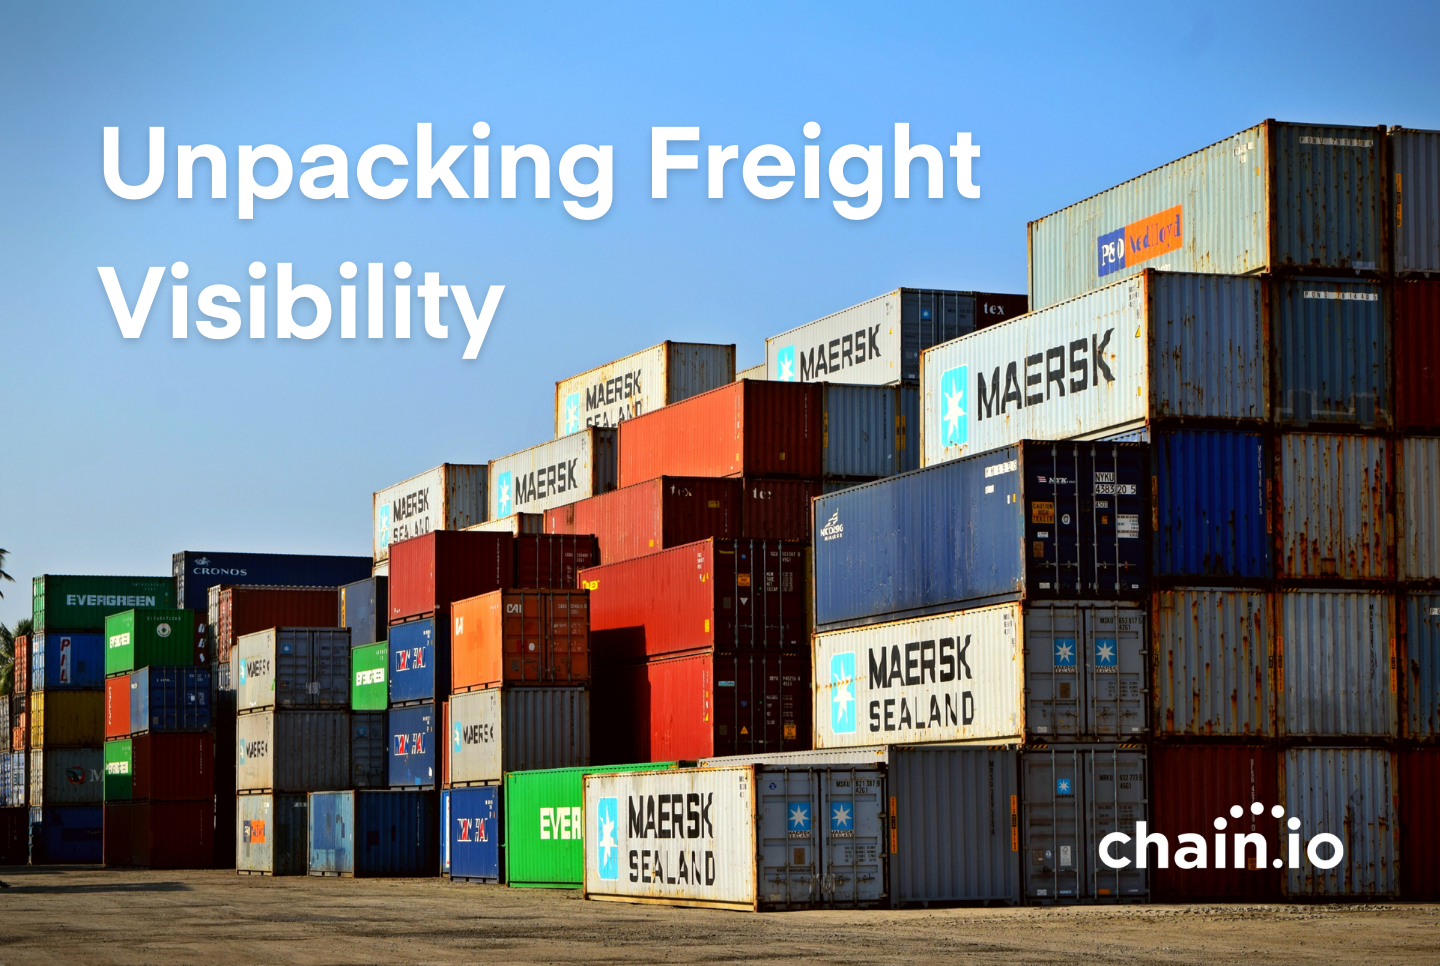 There are two solutions to freight visibility: "Location Visibility" and "Milestone Visibility". Both are useful in answering different questions